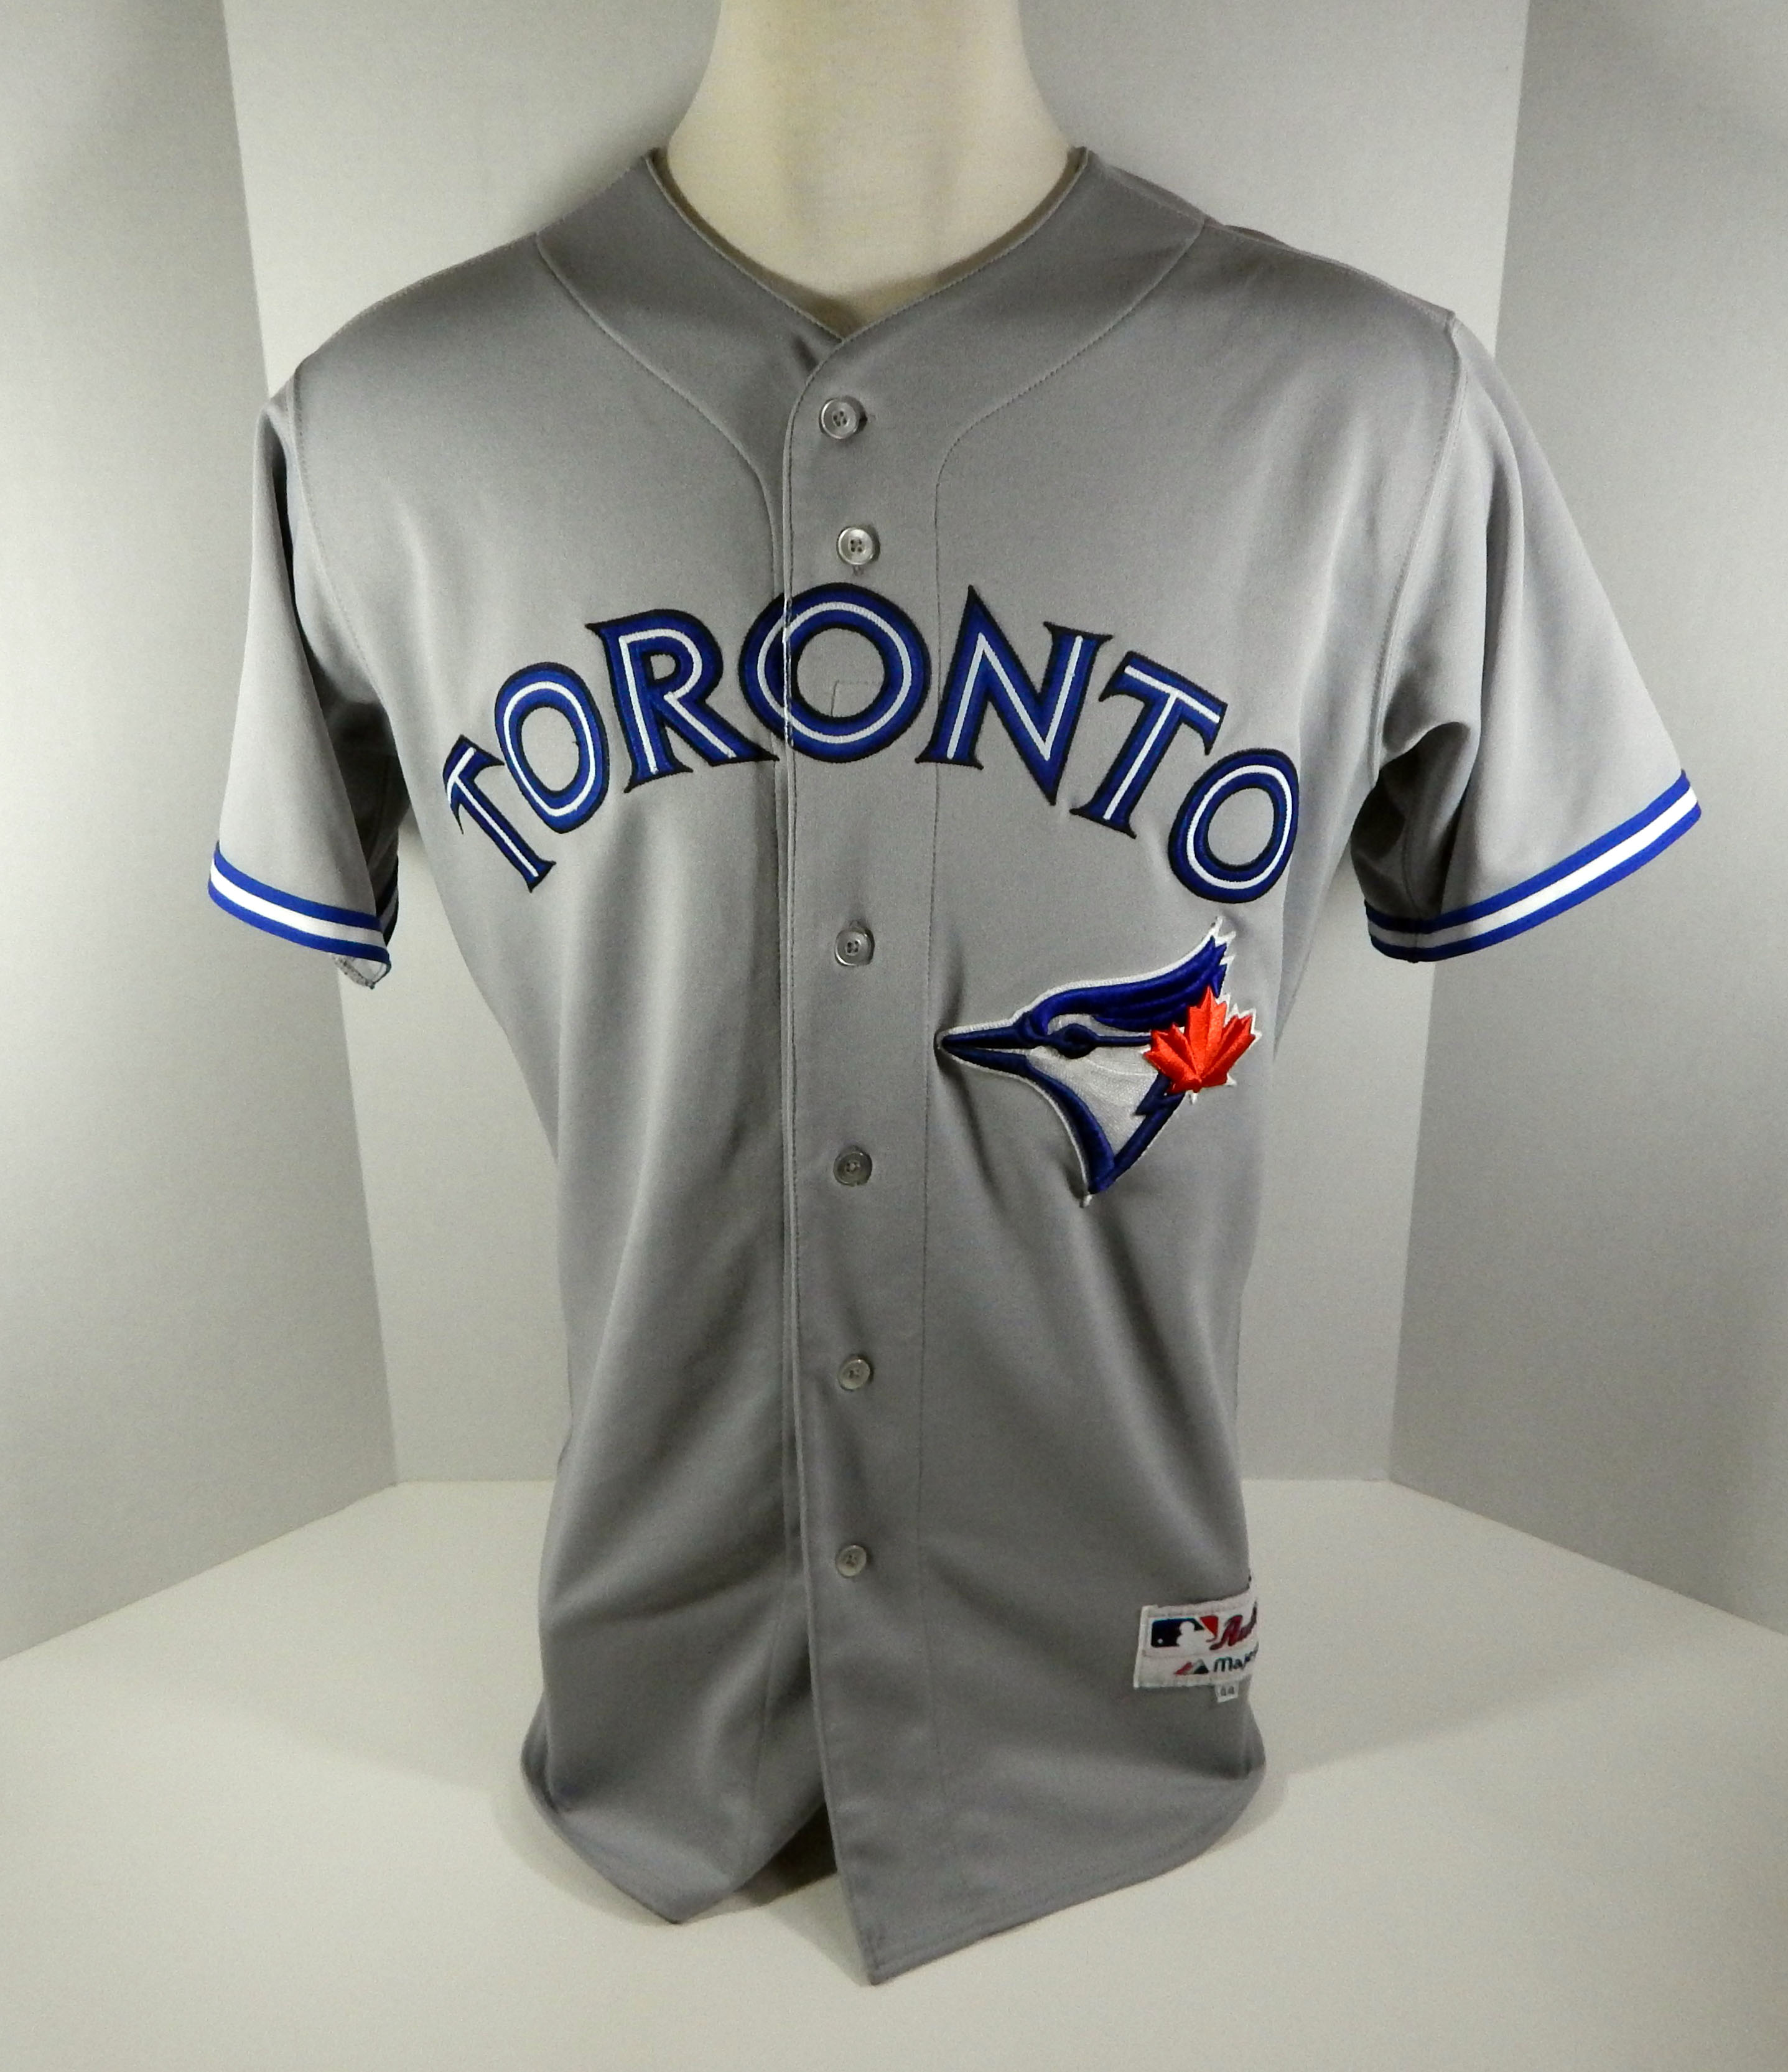 where to buy nfl jerseys in toronto